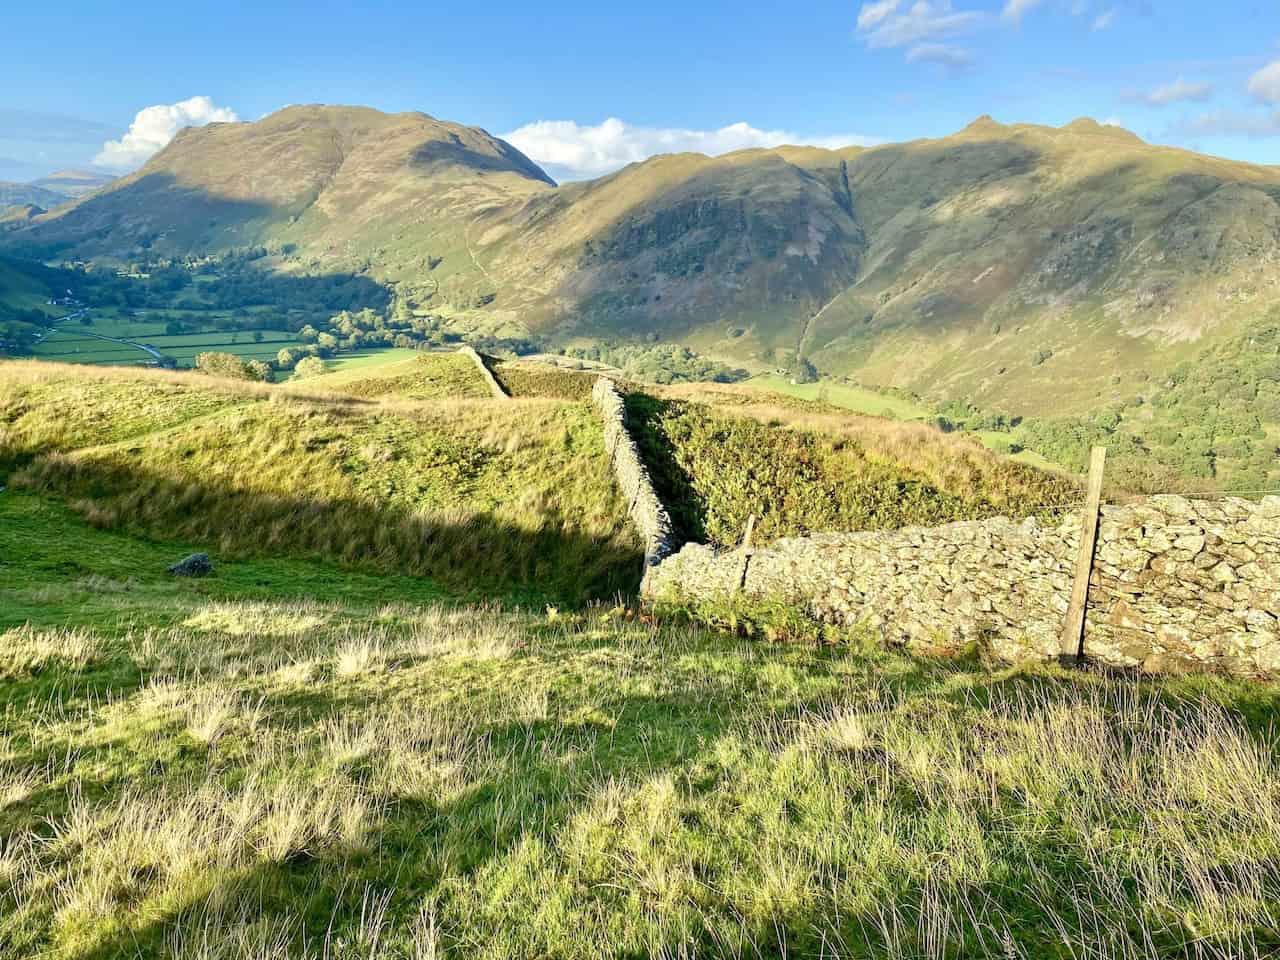 The route from Hartsop above How to Deepdale Bridge generally follows the dry stone wall and affords amazing views of the Place Fell / Angletarn Pikes / Brock Crags range of hills.